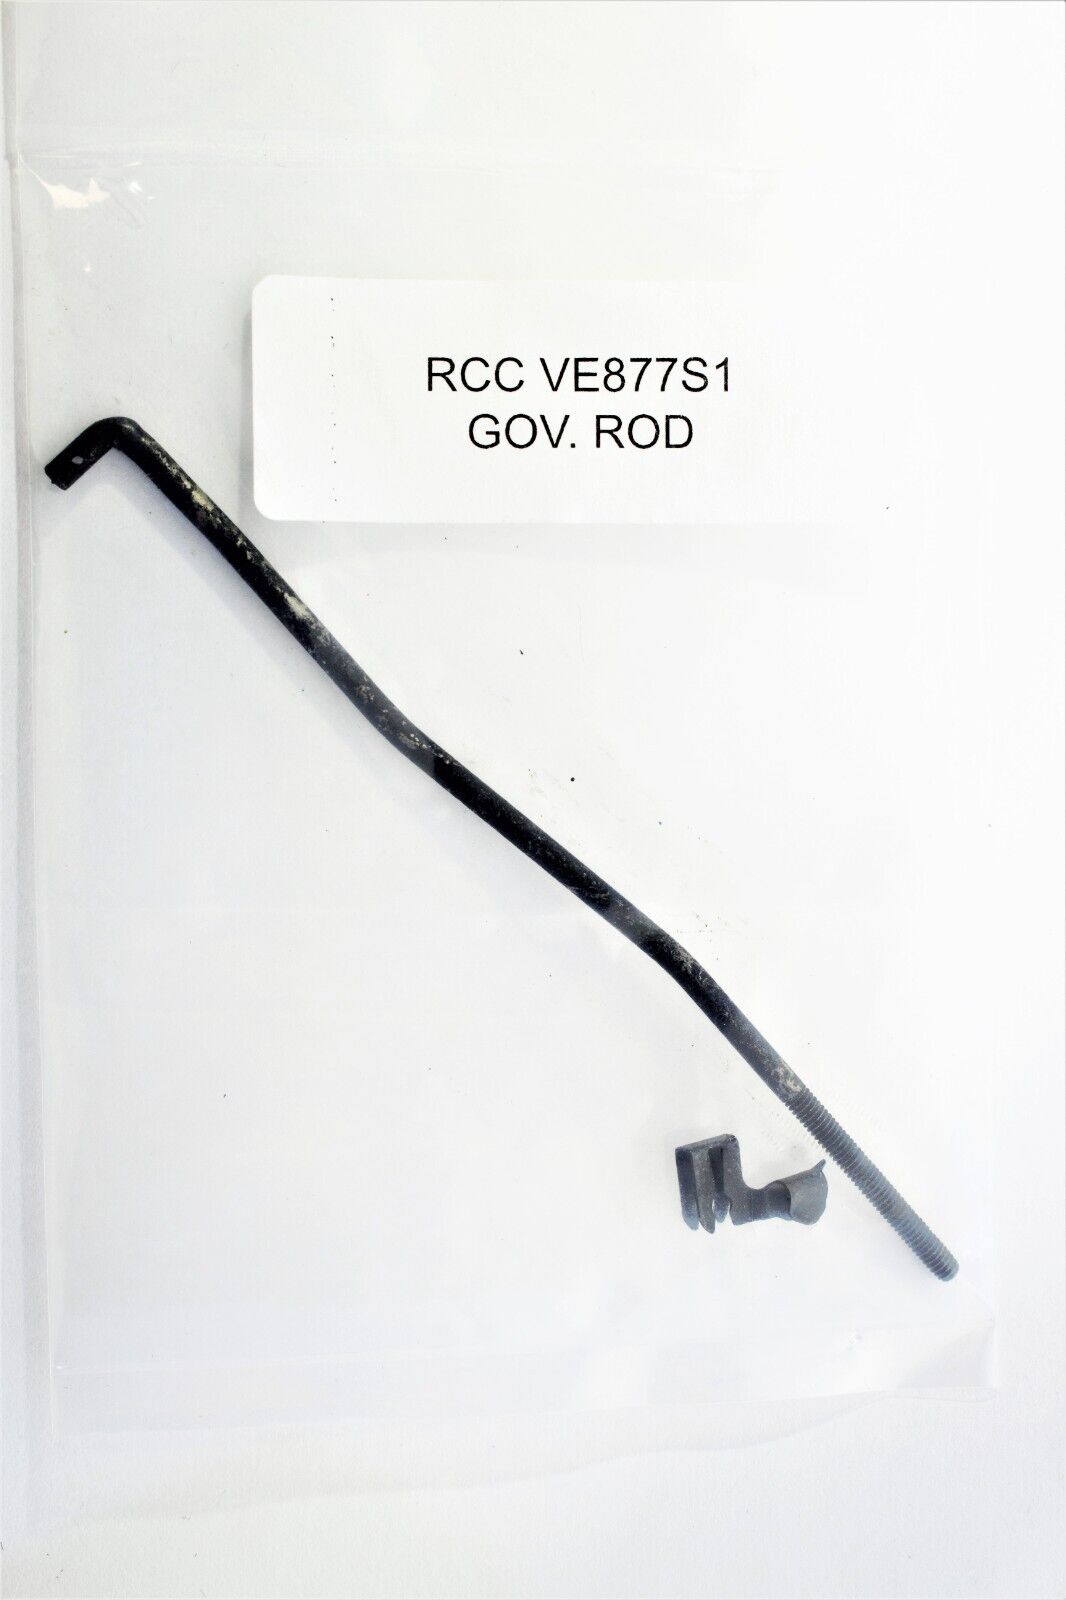 MUST READ Carburetor Governor Control Rod fits Wisconsin TE TF TH THD TJD  T69